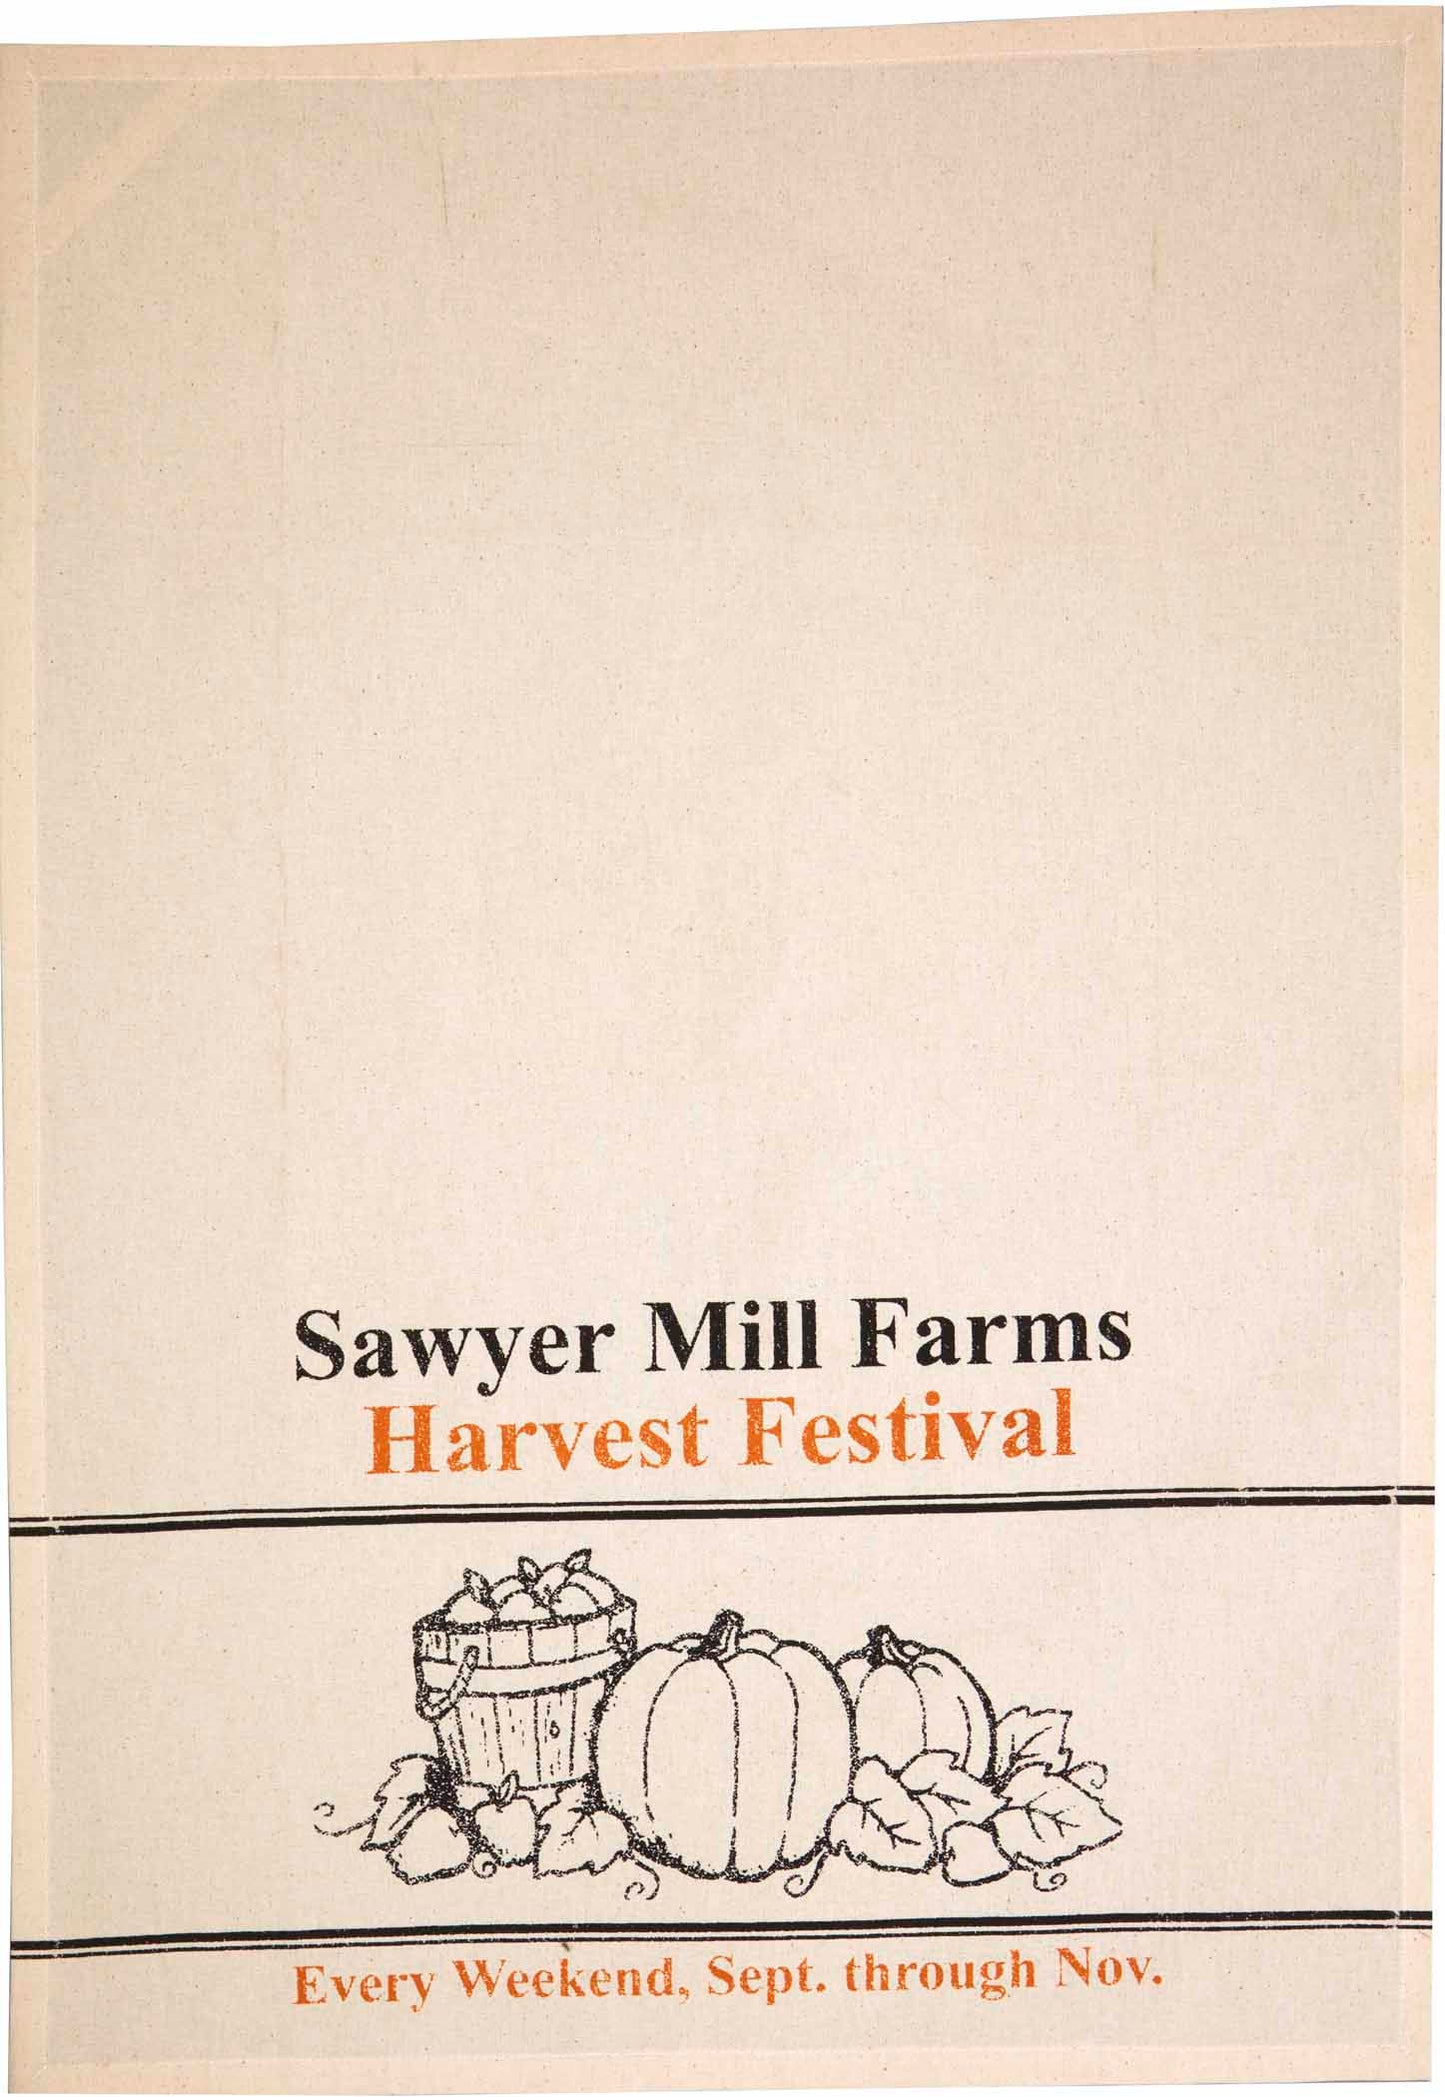 56775-Sawyer-Mill-Charcoal-Harvest-Muslin-Unbleached-Natural-Tea-Towel-Set-of-2-19x28-image-6